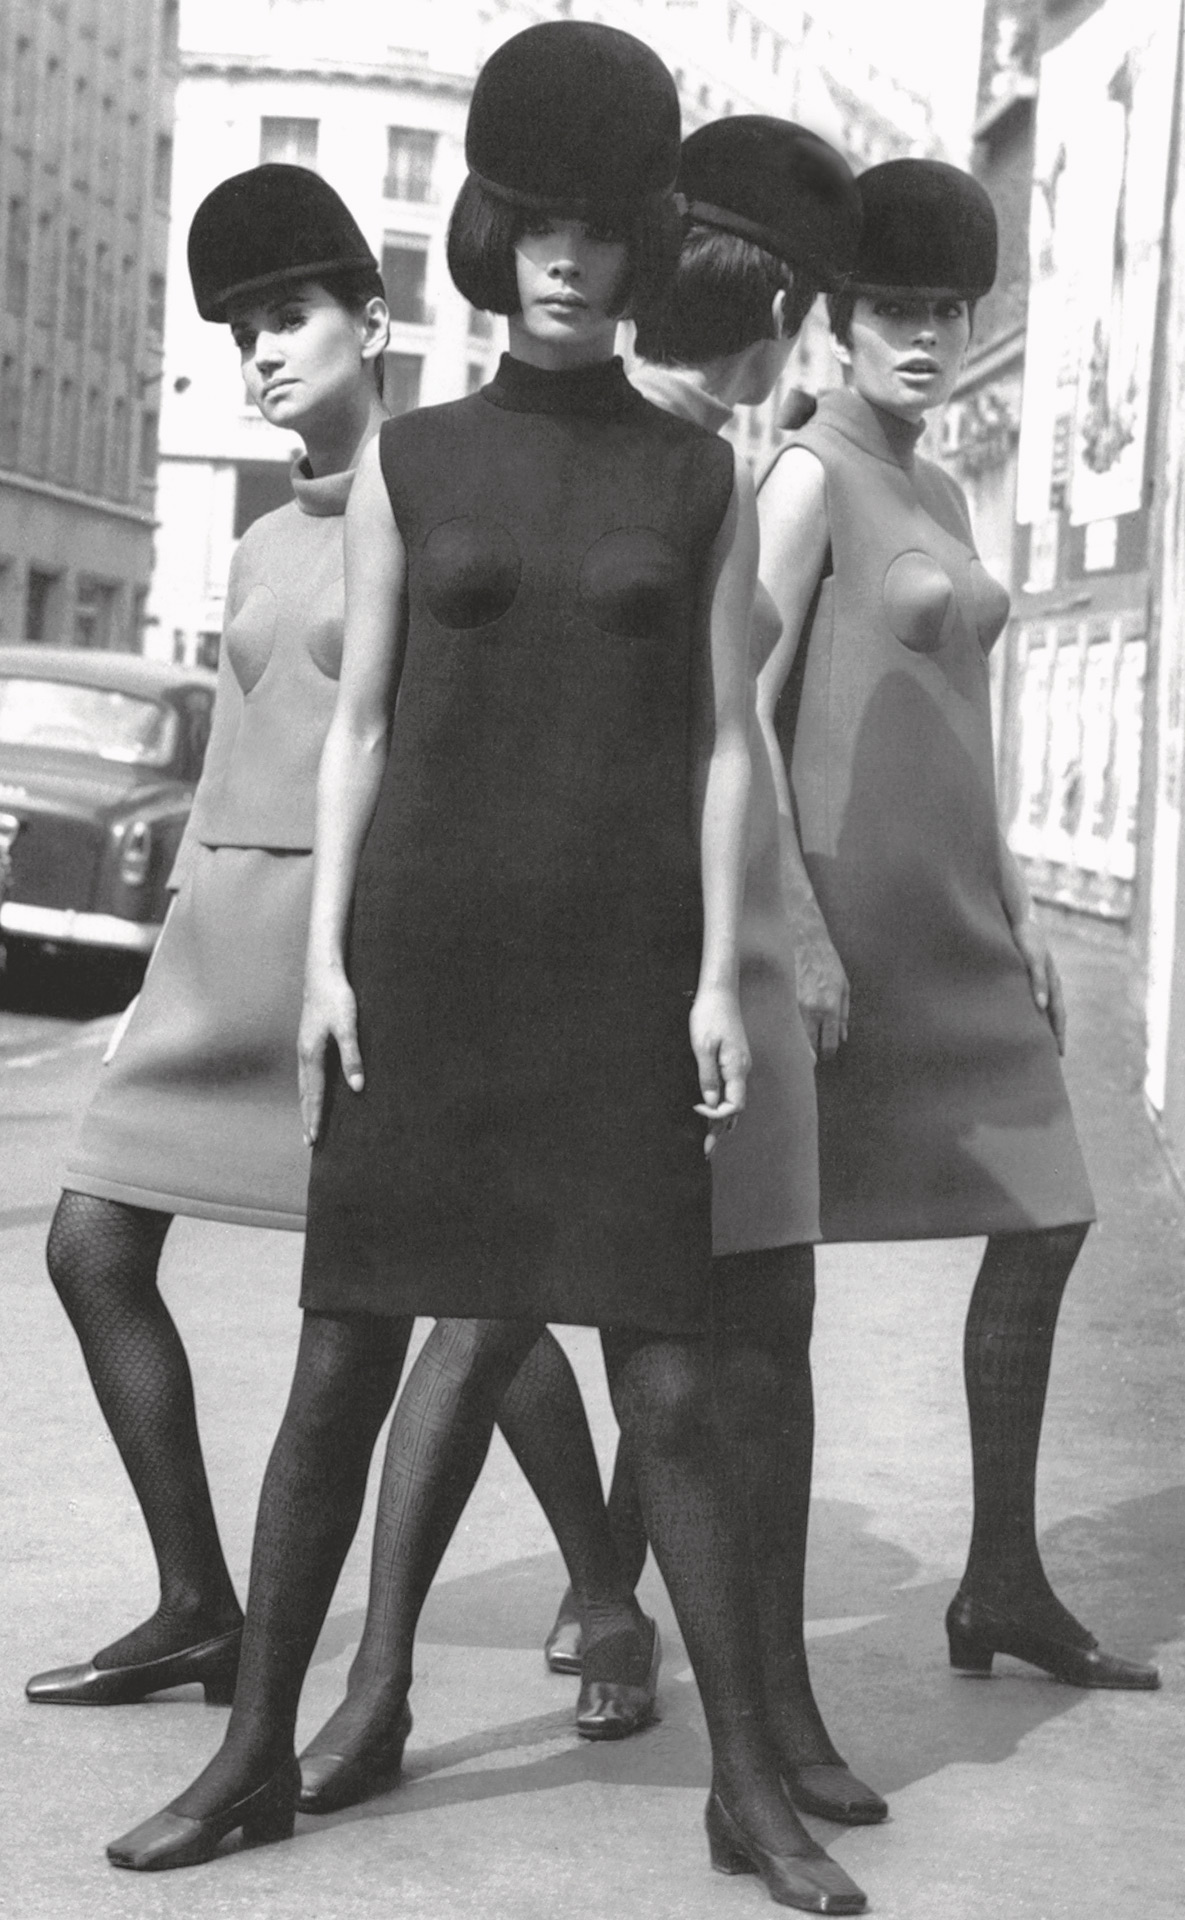 https://www.scadfash.org/sites/fash/files/Exhibitions-SCAD-FASH-Pierre-Cardin-cocktail-dresses.jpg